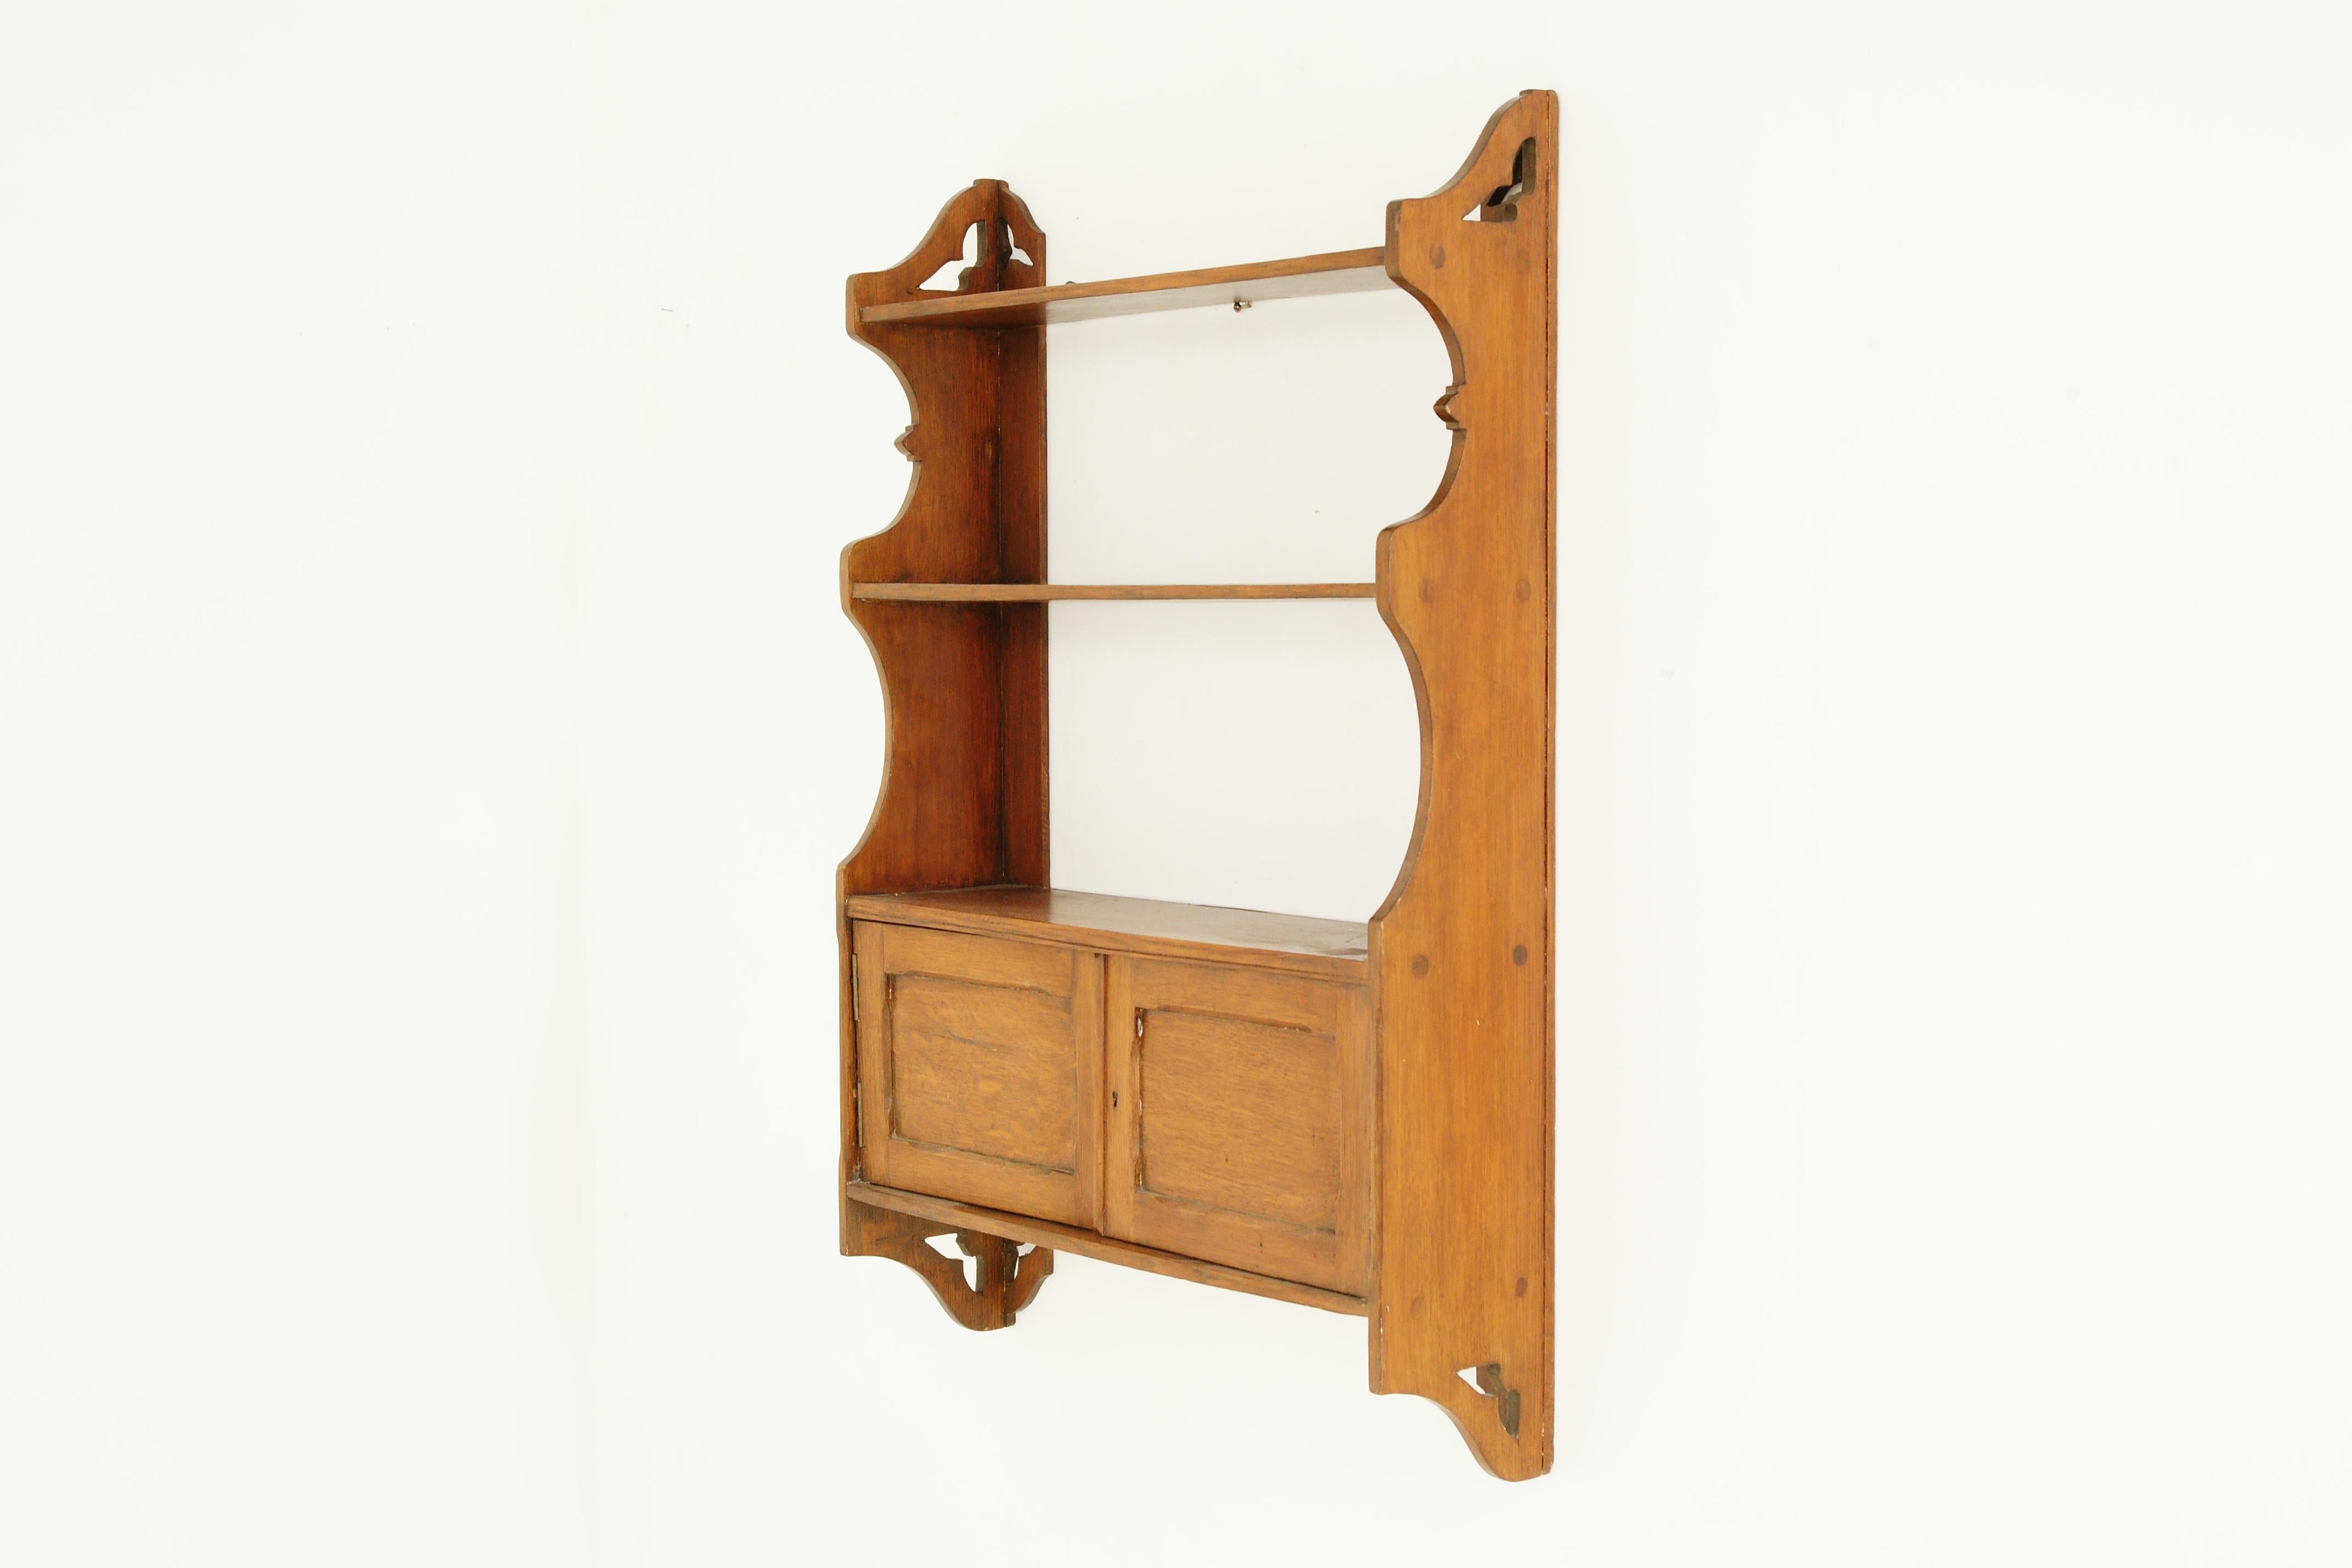 Antique Arts & Crafts oak 3-tiered wall cabinet, Antique Furniture, Scotland 1910

Scotland 1910
Solid oak, original finish
Shaped top to the sides
Three shelves below
Pair of panelled doors underneath
Open to reveal single shelf
Nice colour